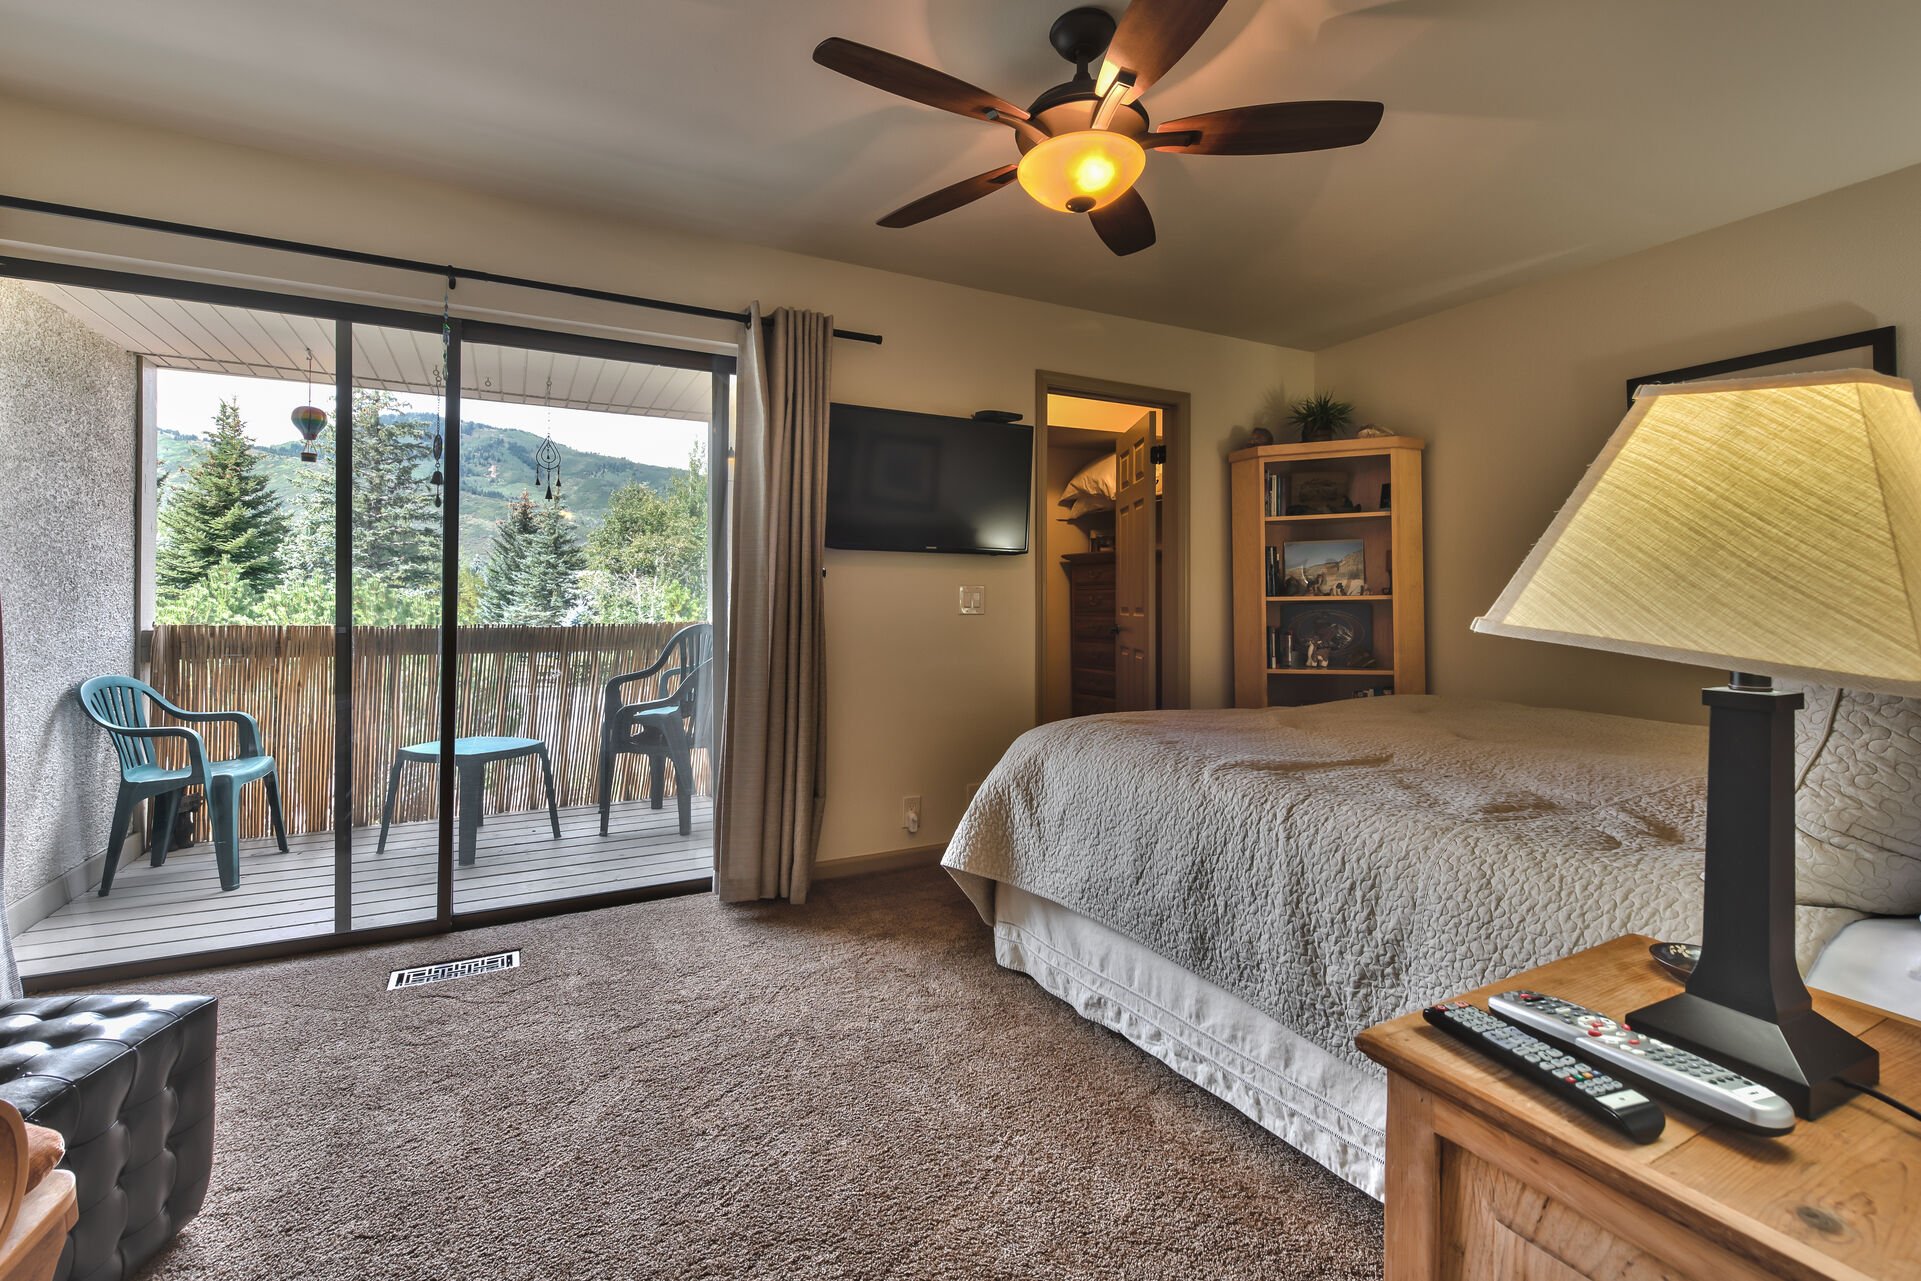 Upper Level Master Bedroom with King Bed, LCD Flat Screen TV, Electric Fireplace, Walk-in Closet, and a Private Deck with Mountain Views